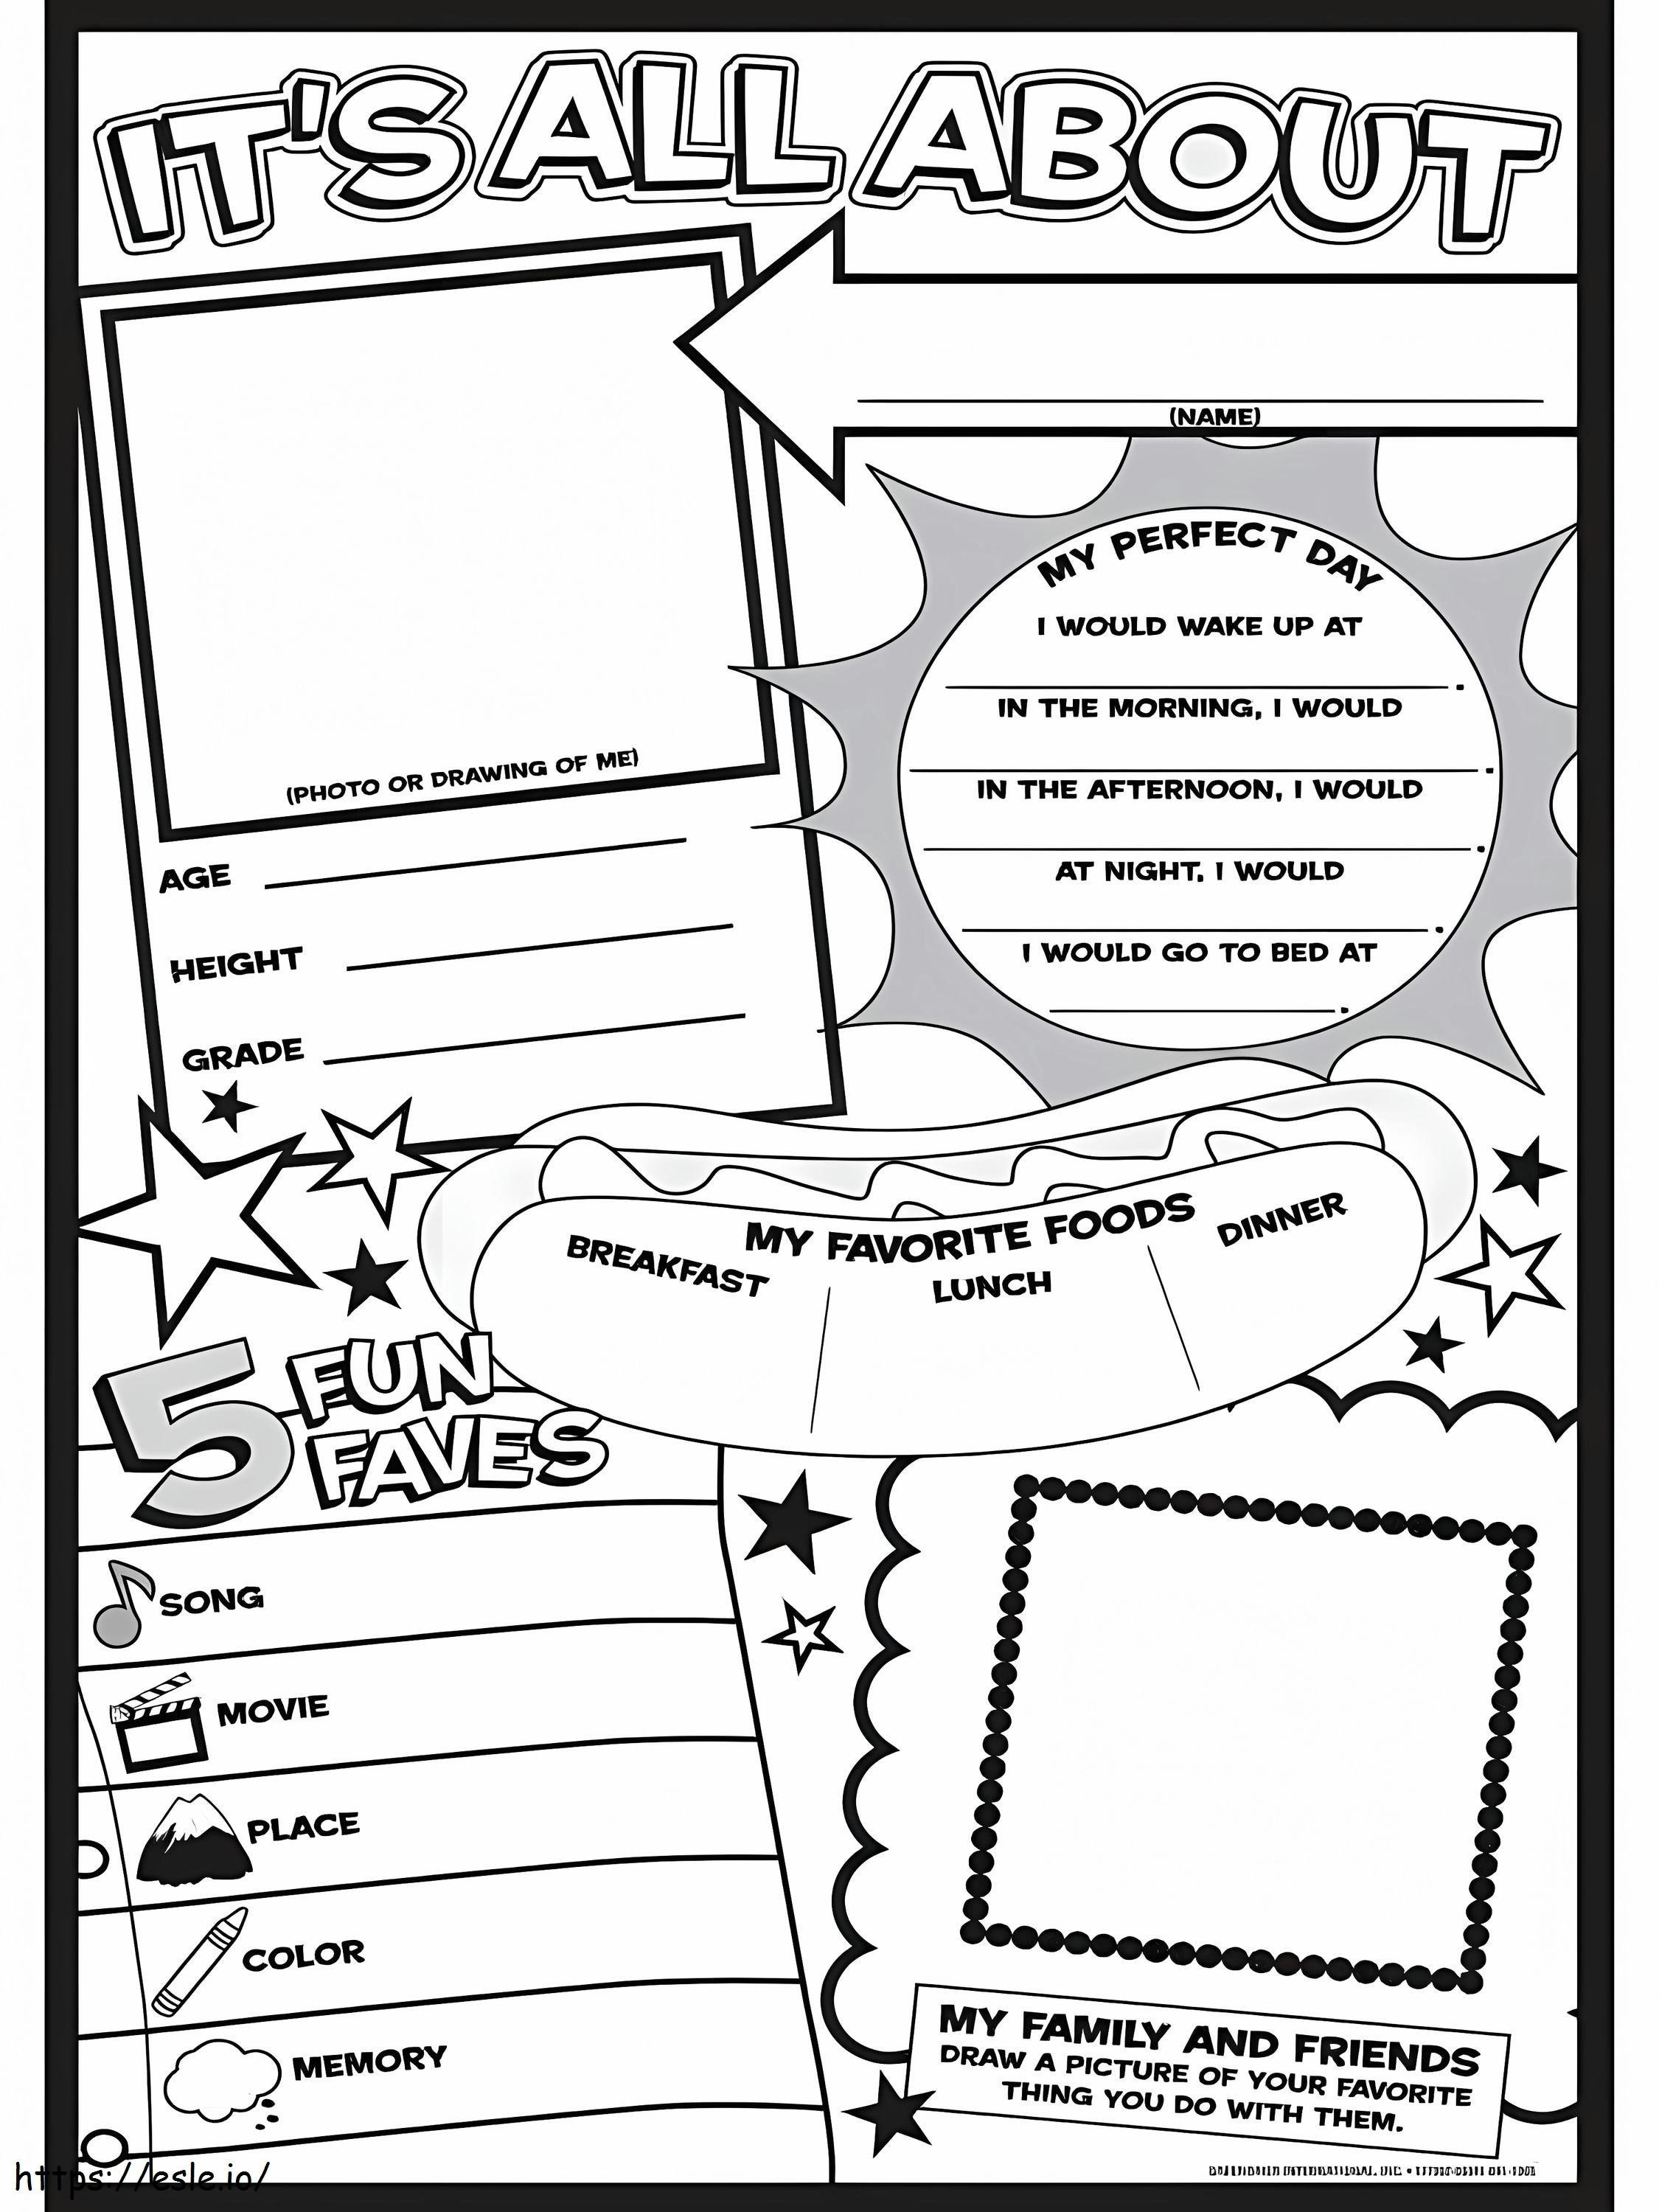 All About Me 5 coloring page